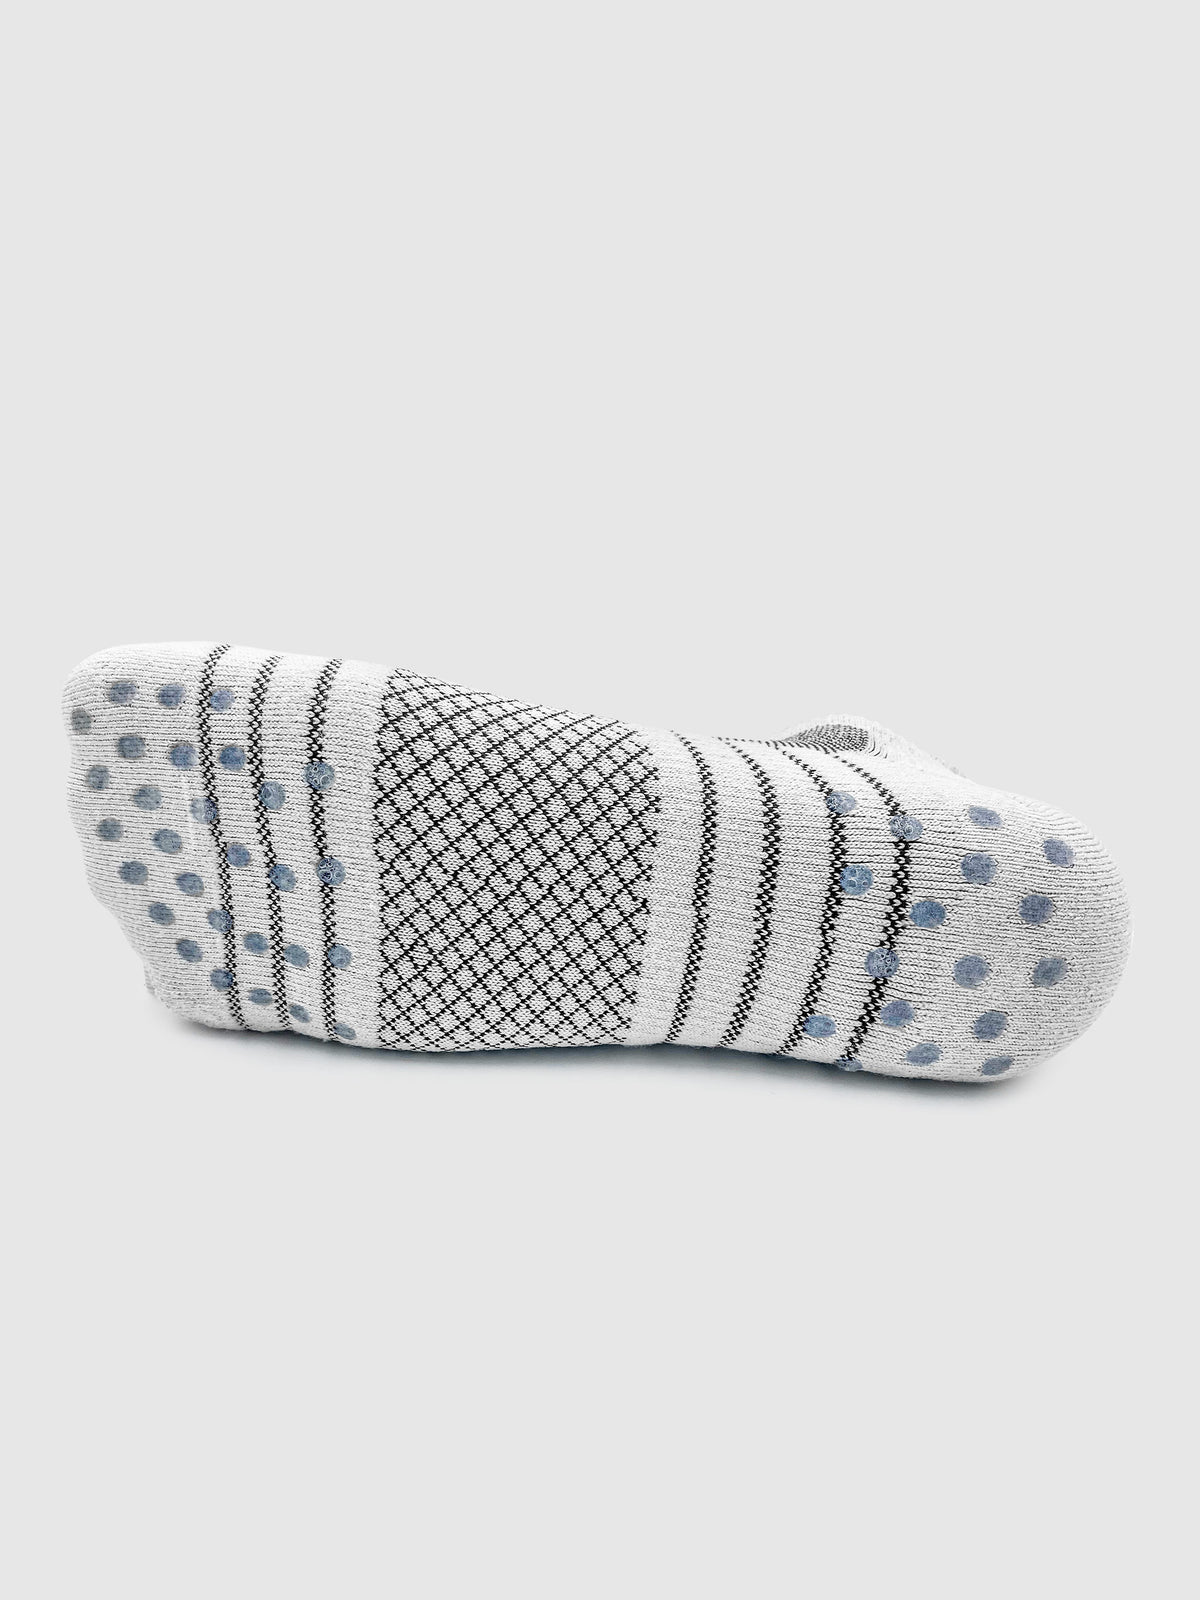 The bottom of a white and gray golf sock